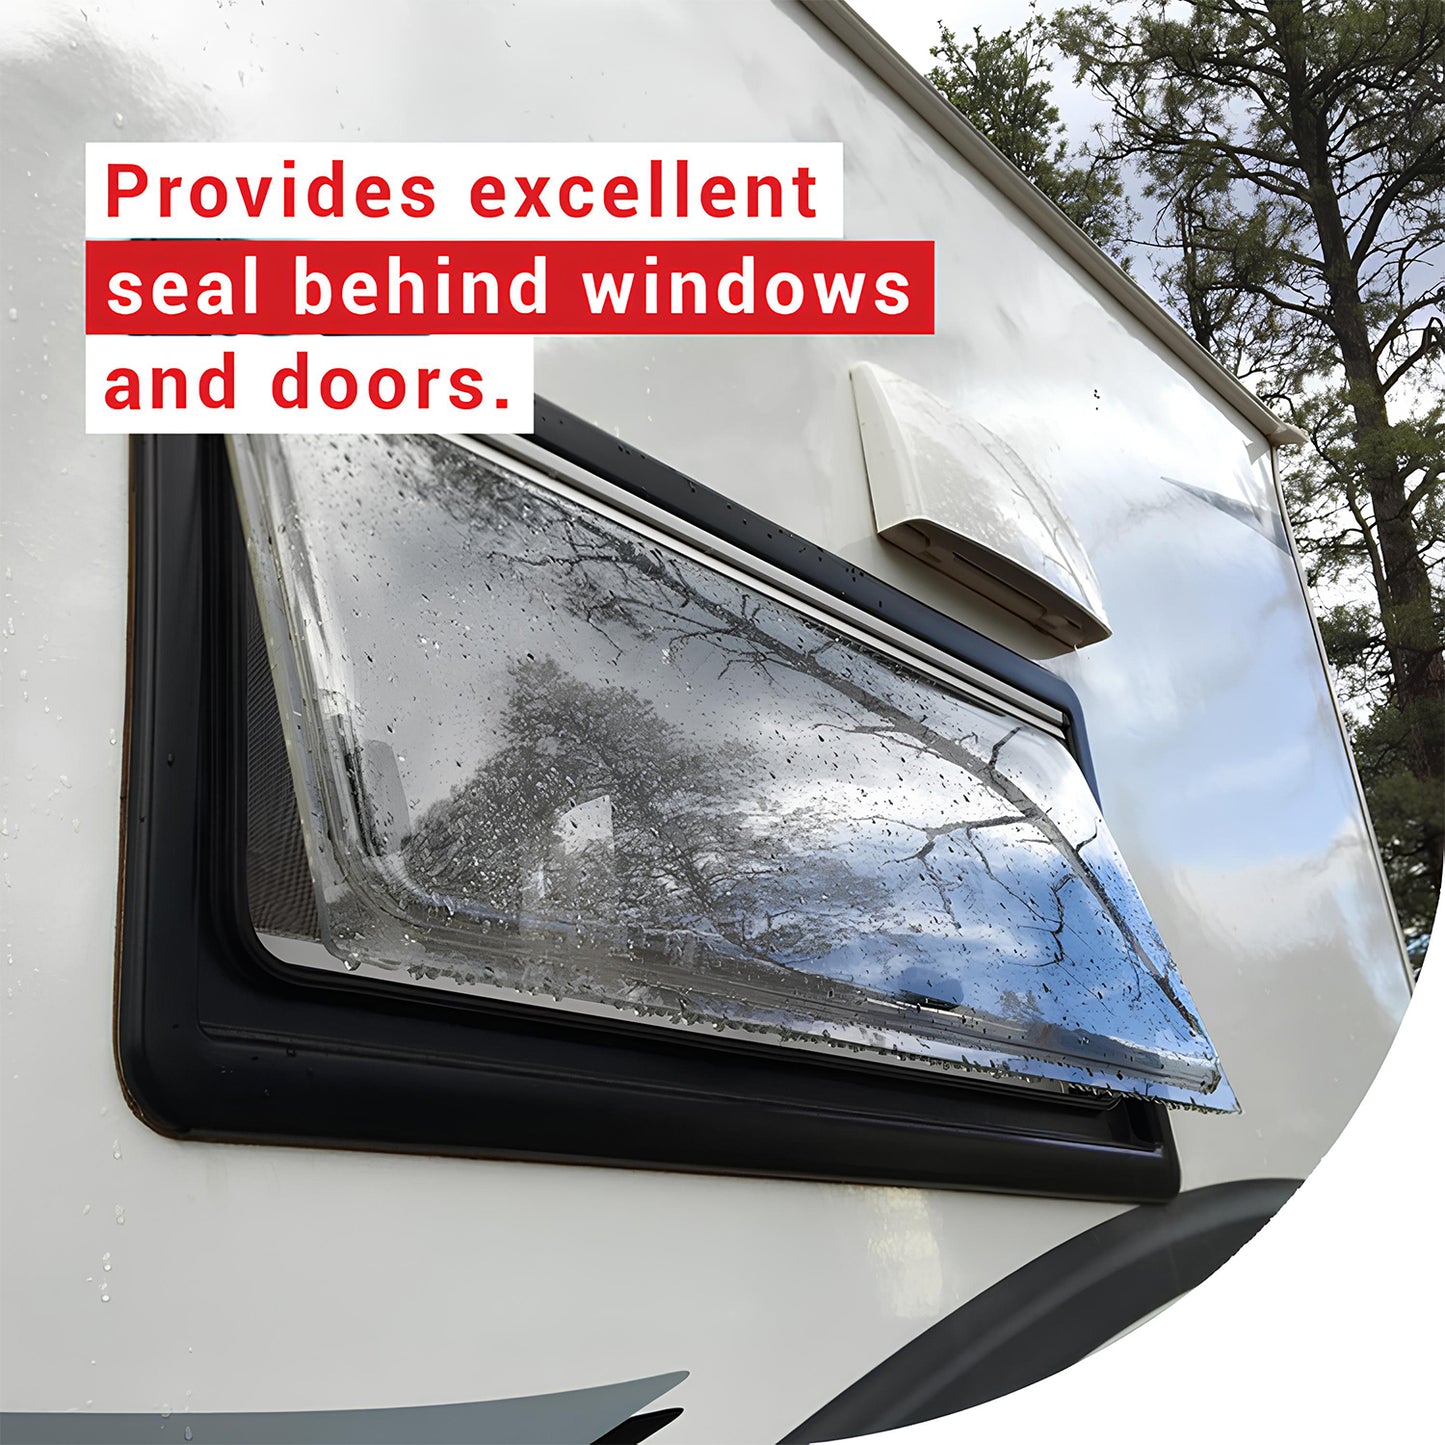 Provides excellent seal behind windows and doors